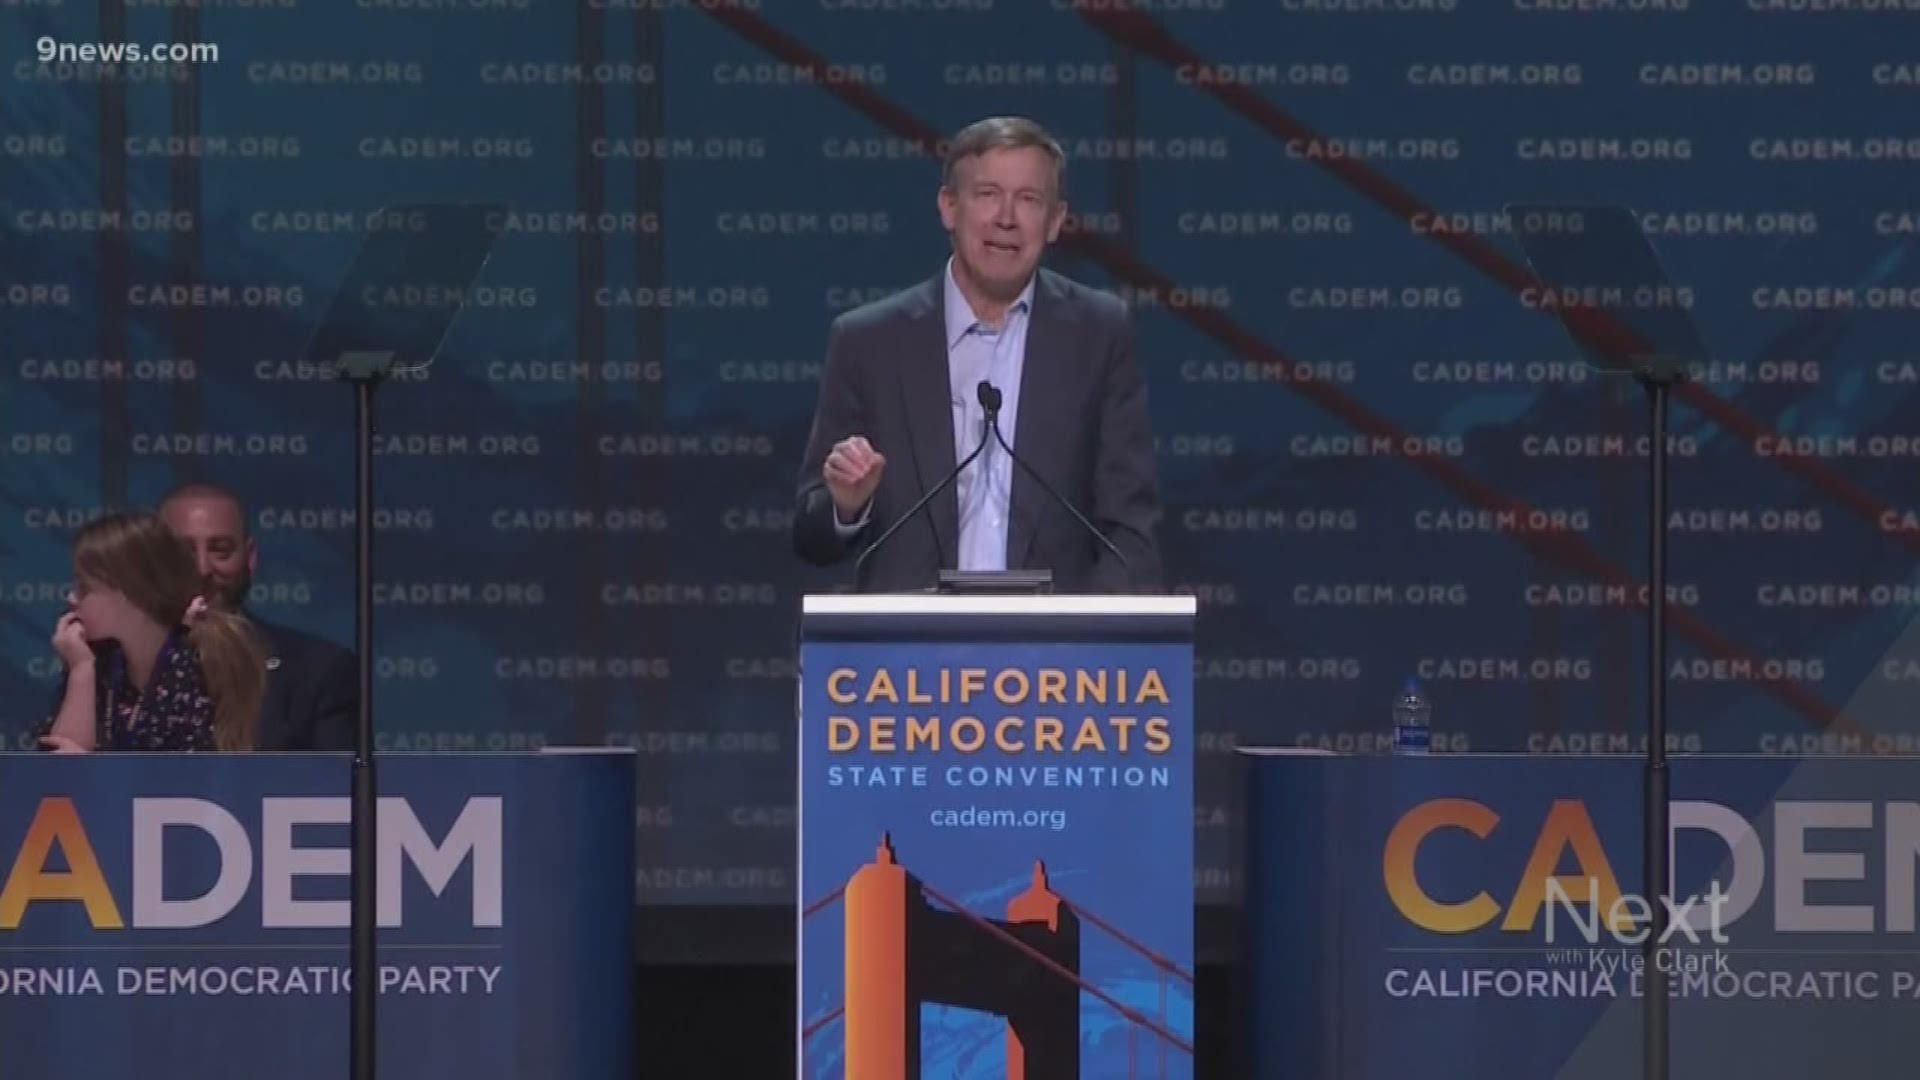 The best thing to happen to John Hickenlooper's presidential campaign was getting booed this weekend. He's trying to rally moderate Democrats, so getting heckled by socialists in San Francisco is genius.